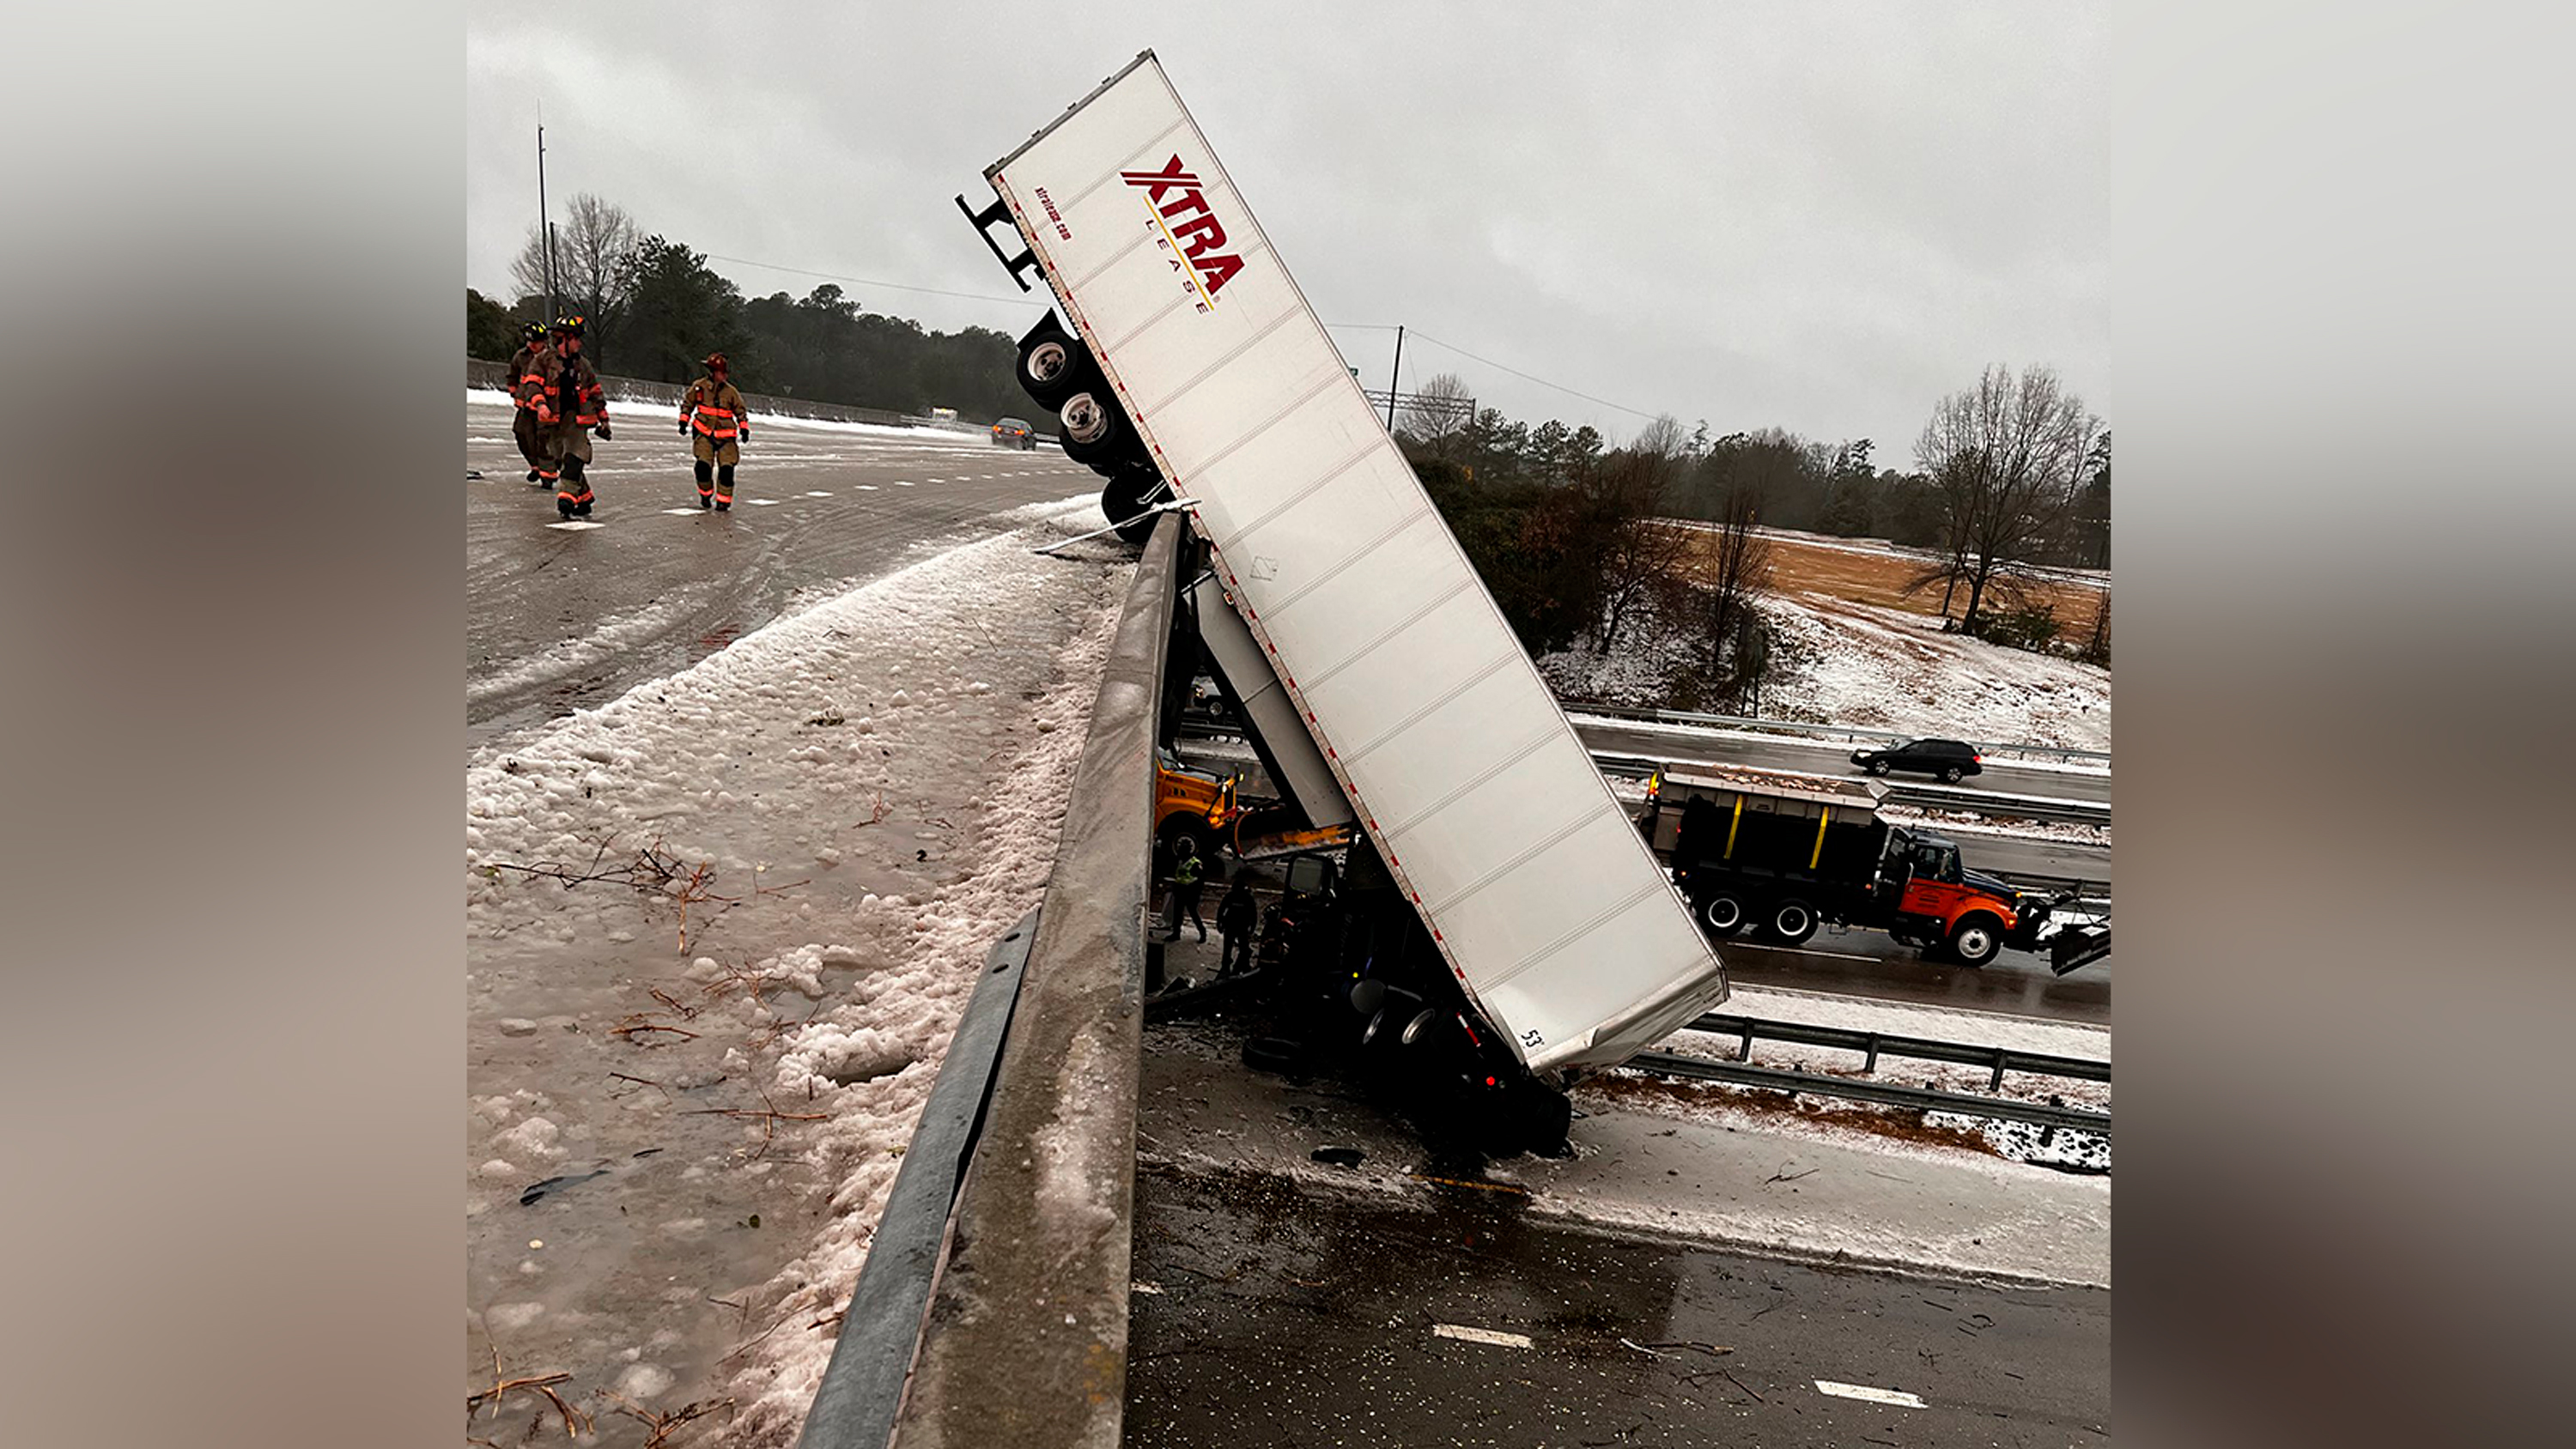 In this photo provided by the Durham Police Department, a truck hangs from the highway N.C. 147 overpass after its cab apparently slid off the highway during winter weather, Sunday, January 16, in Durham, N.C. The cab of the truck appeared to have landed upright on Highway 15-501 below, while the trailer was in a vertical position, from the bridge to the highway below, causing road closures. 